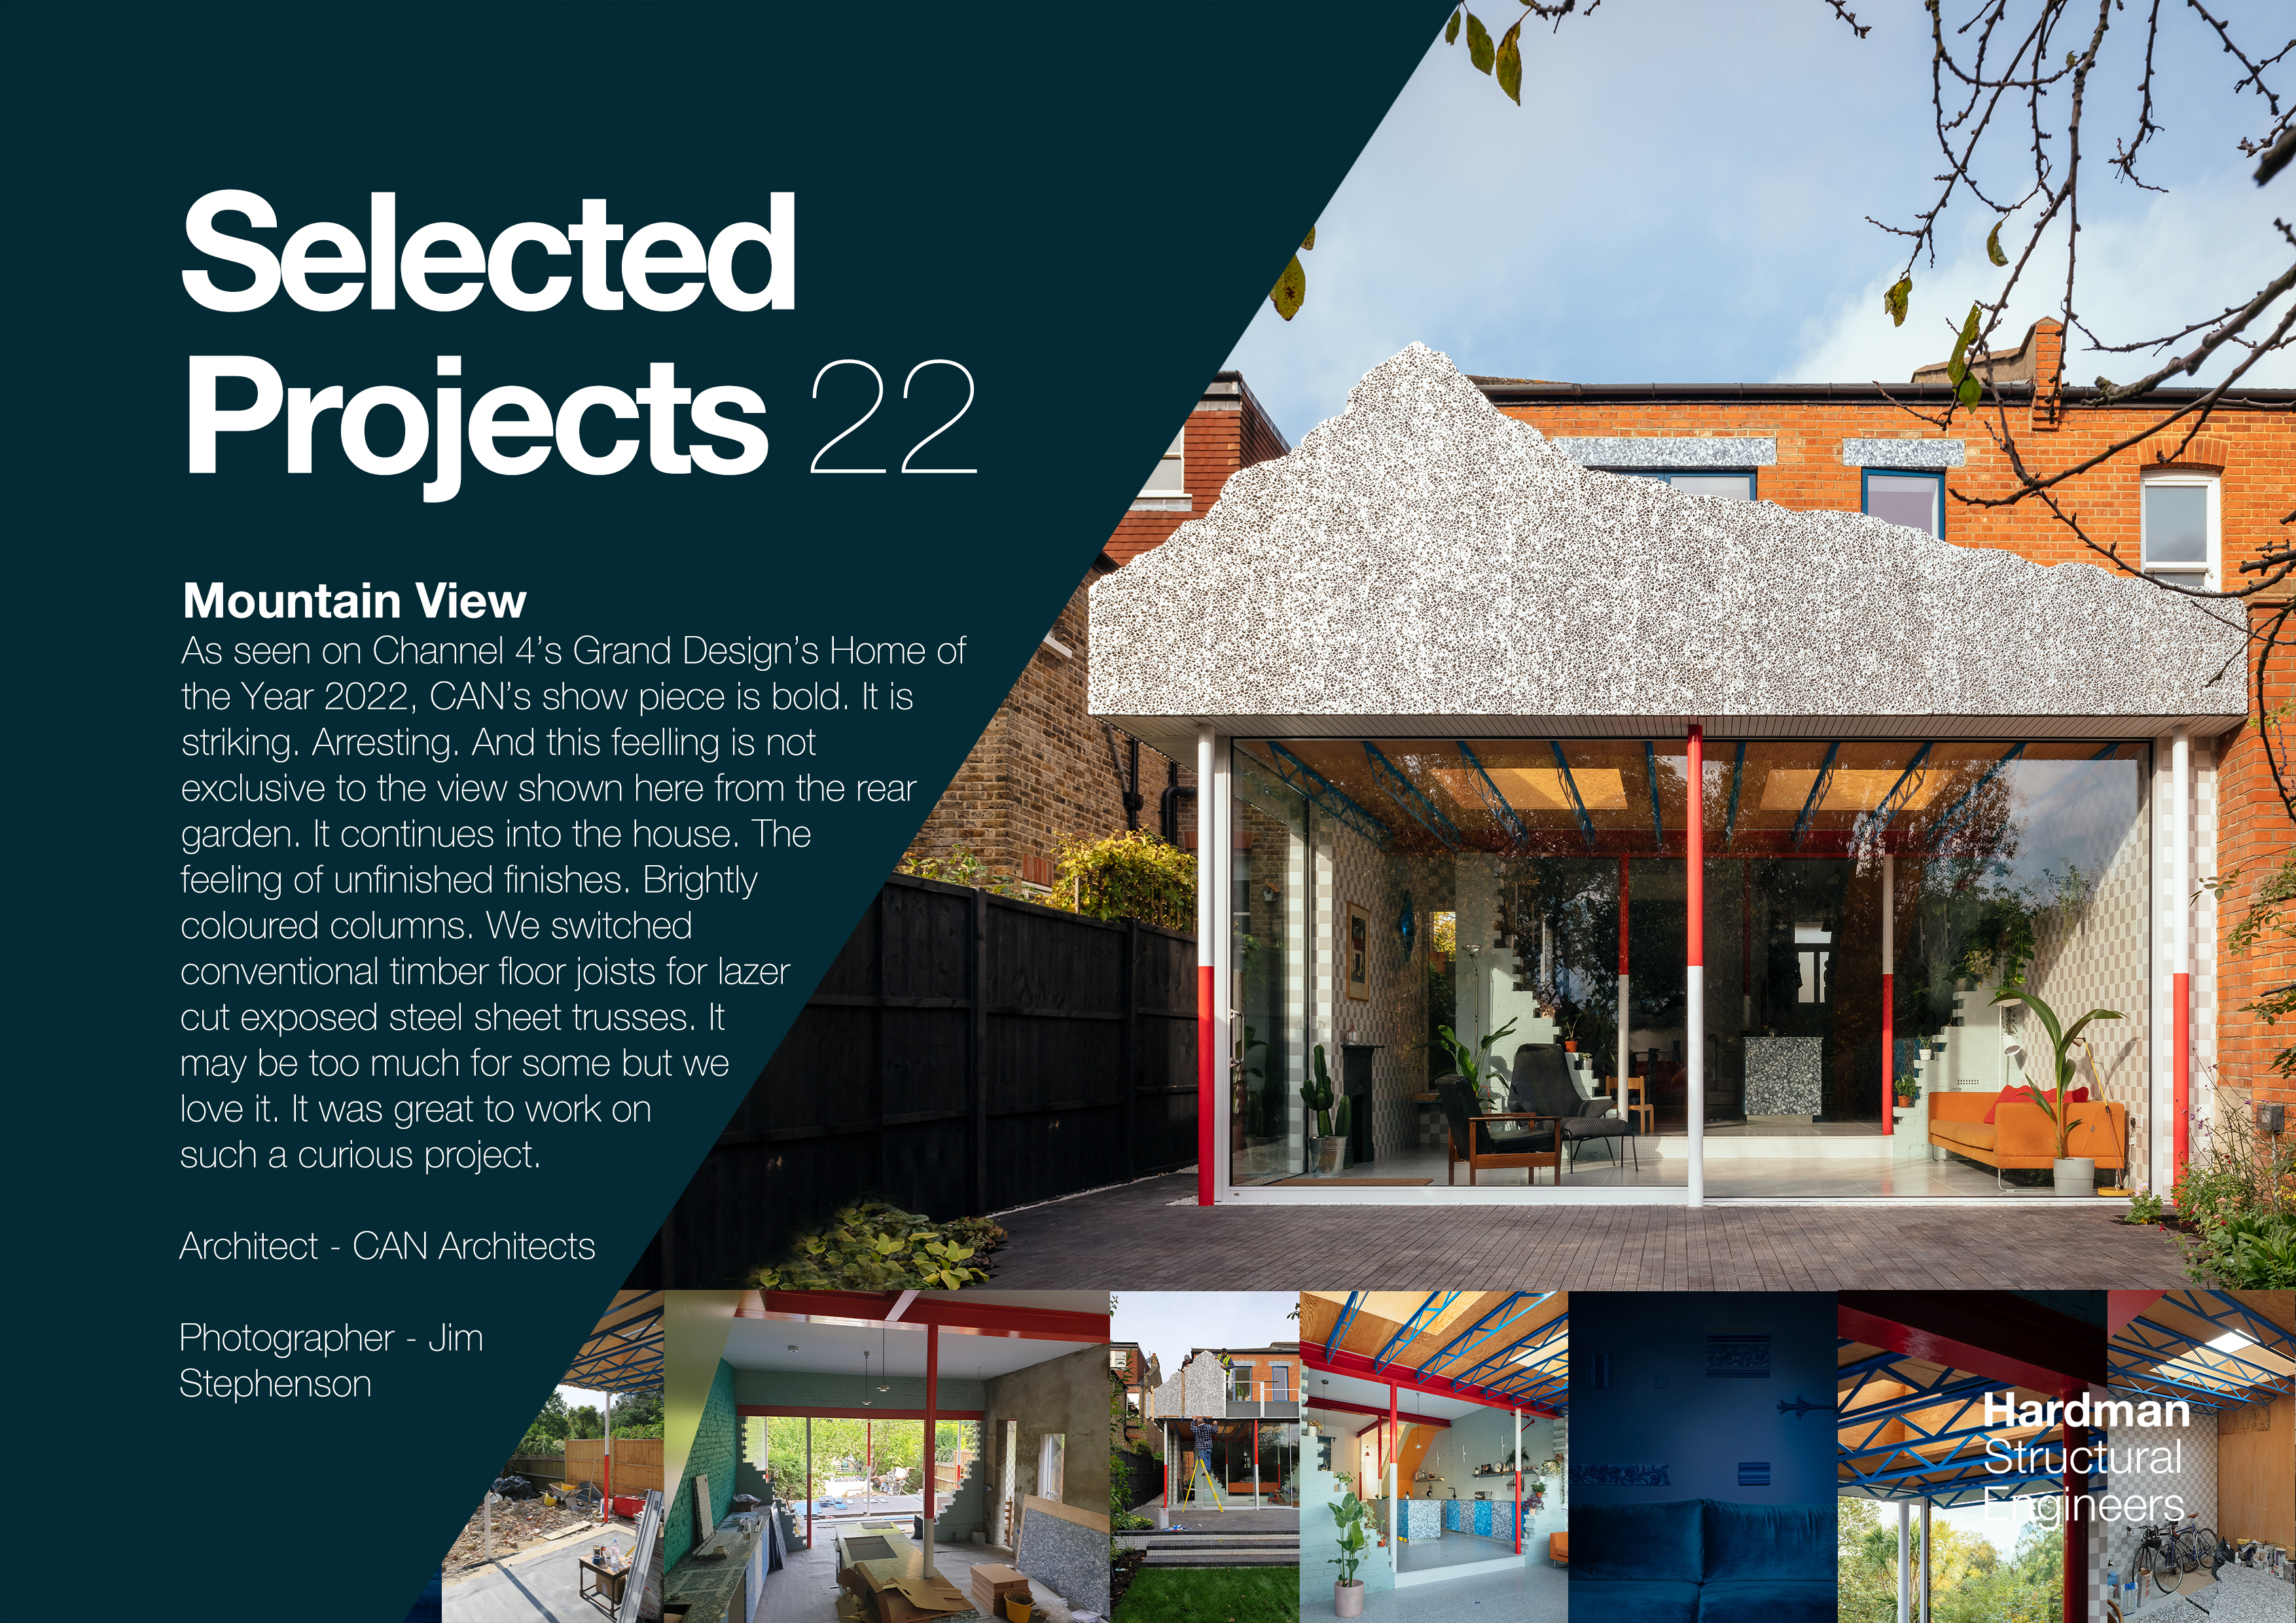 Selected Projects - Mountain View